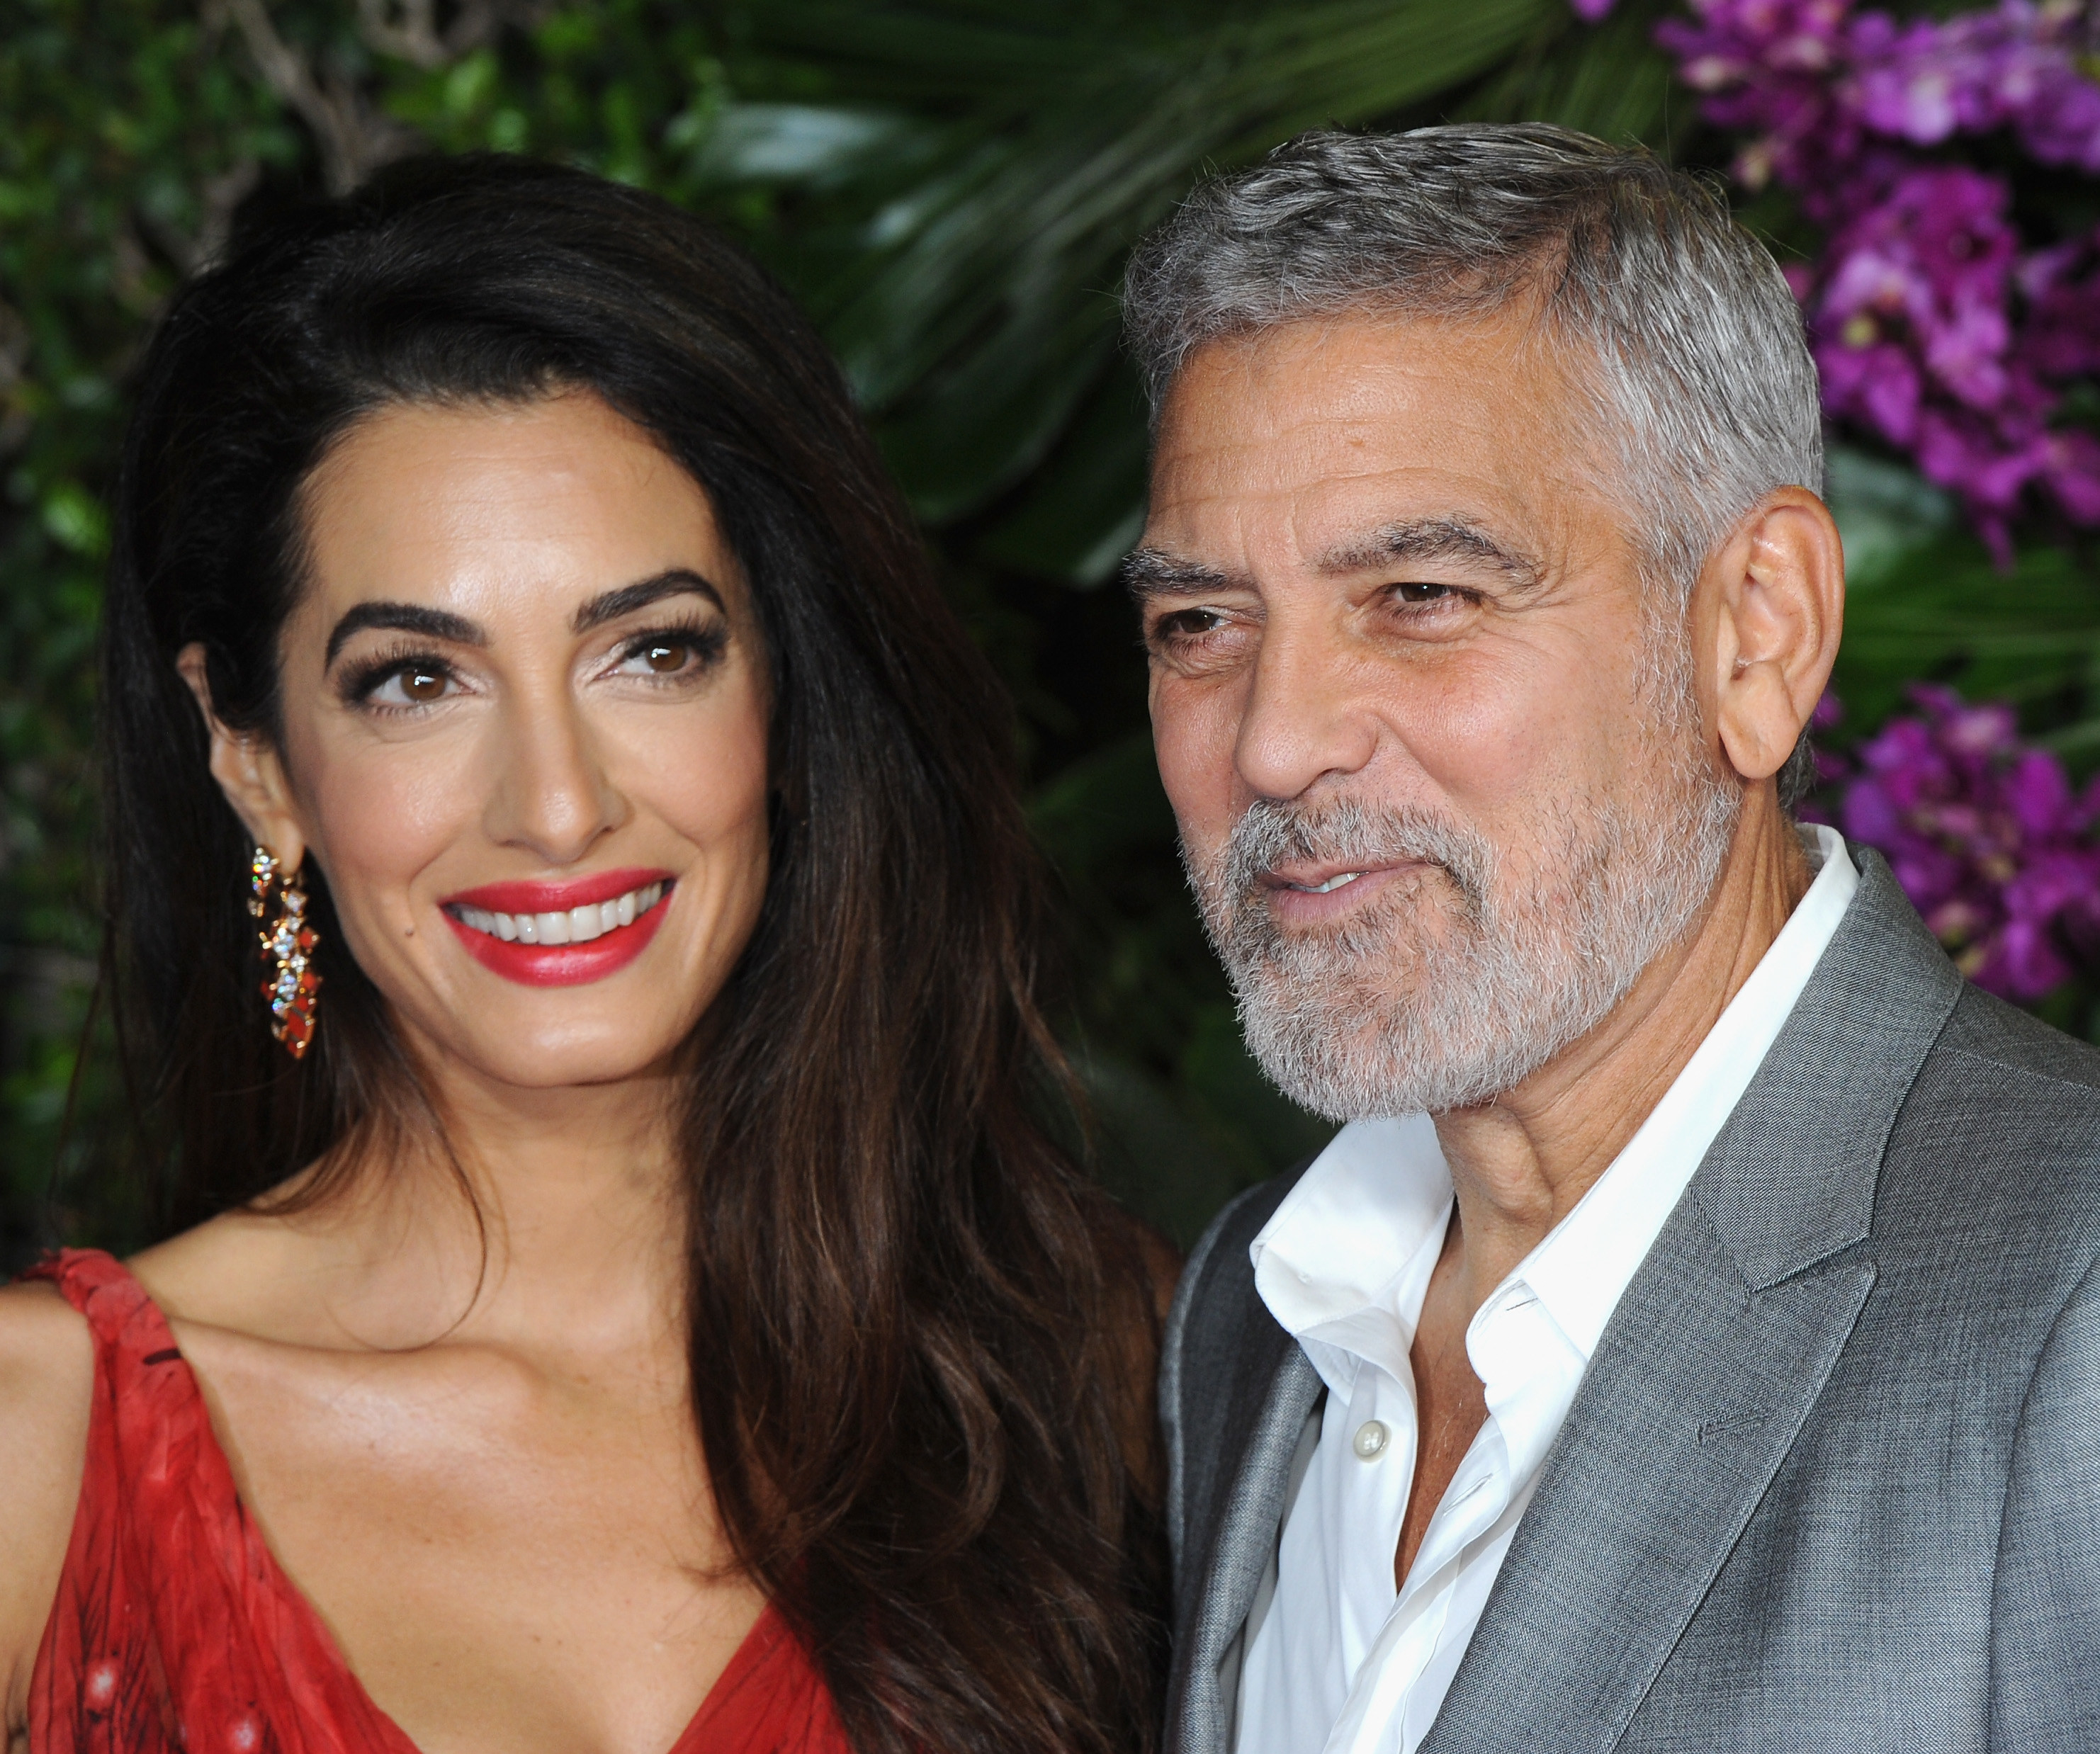 A close up shot of Amal and George Clooney attending a red carpet event